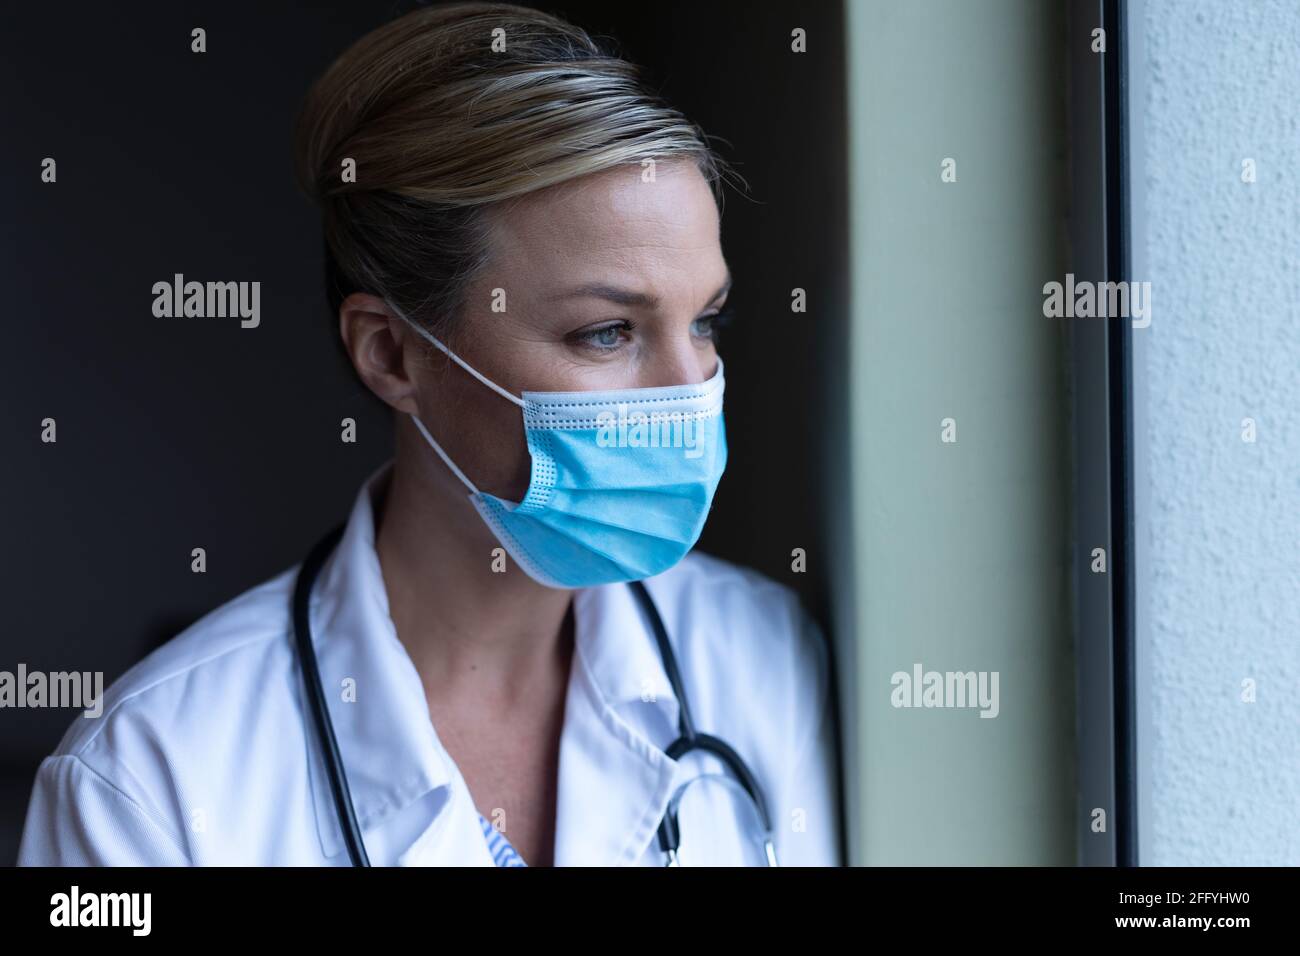 Portrait of caucasian female doctor wearing mask looking ahead Stock Photo